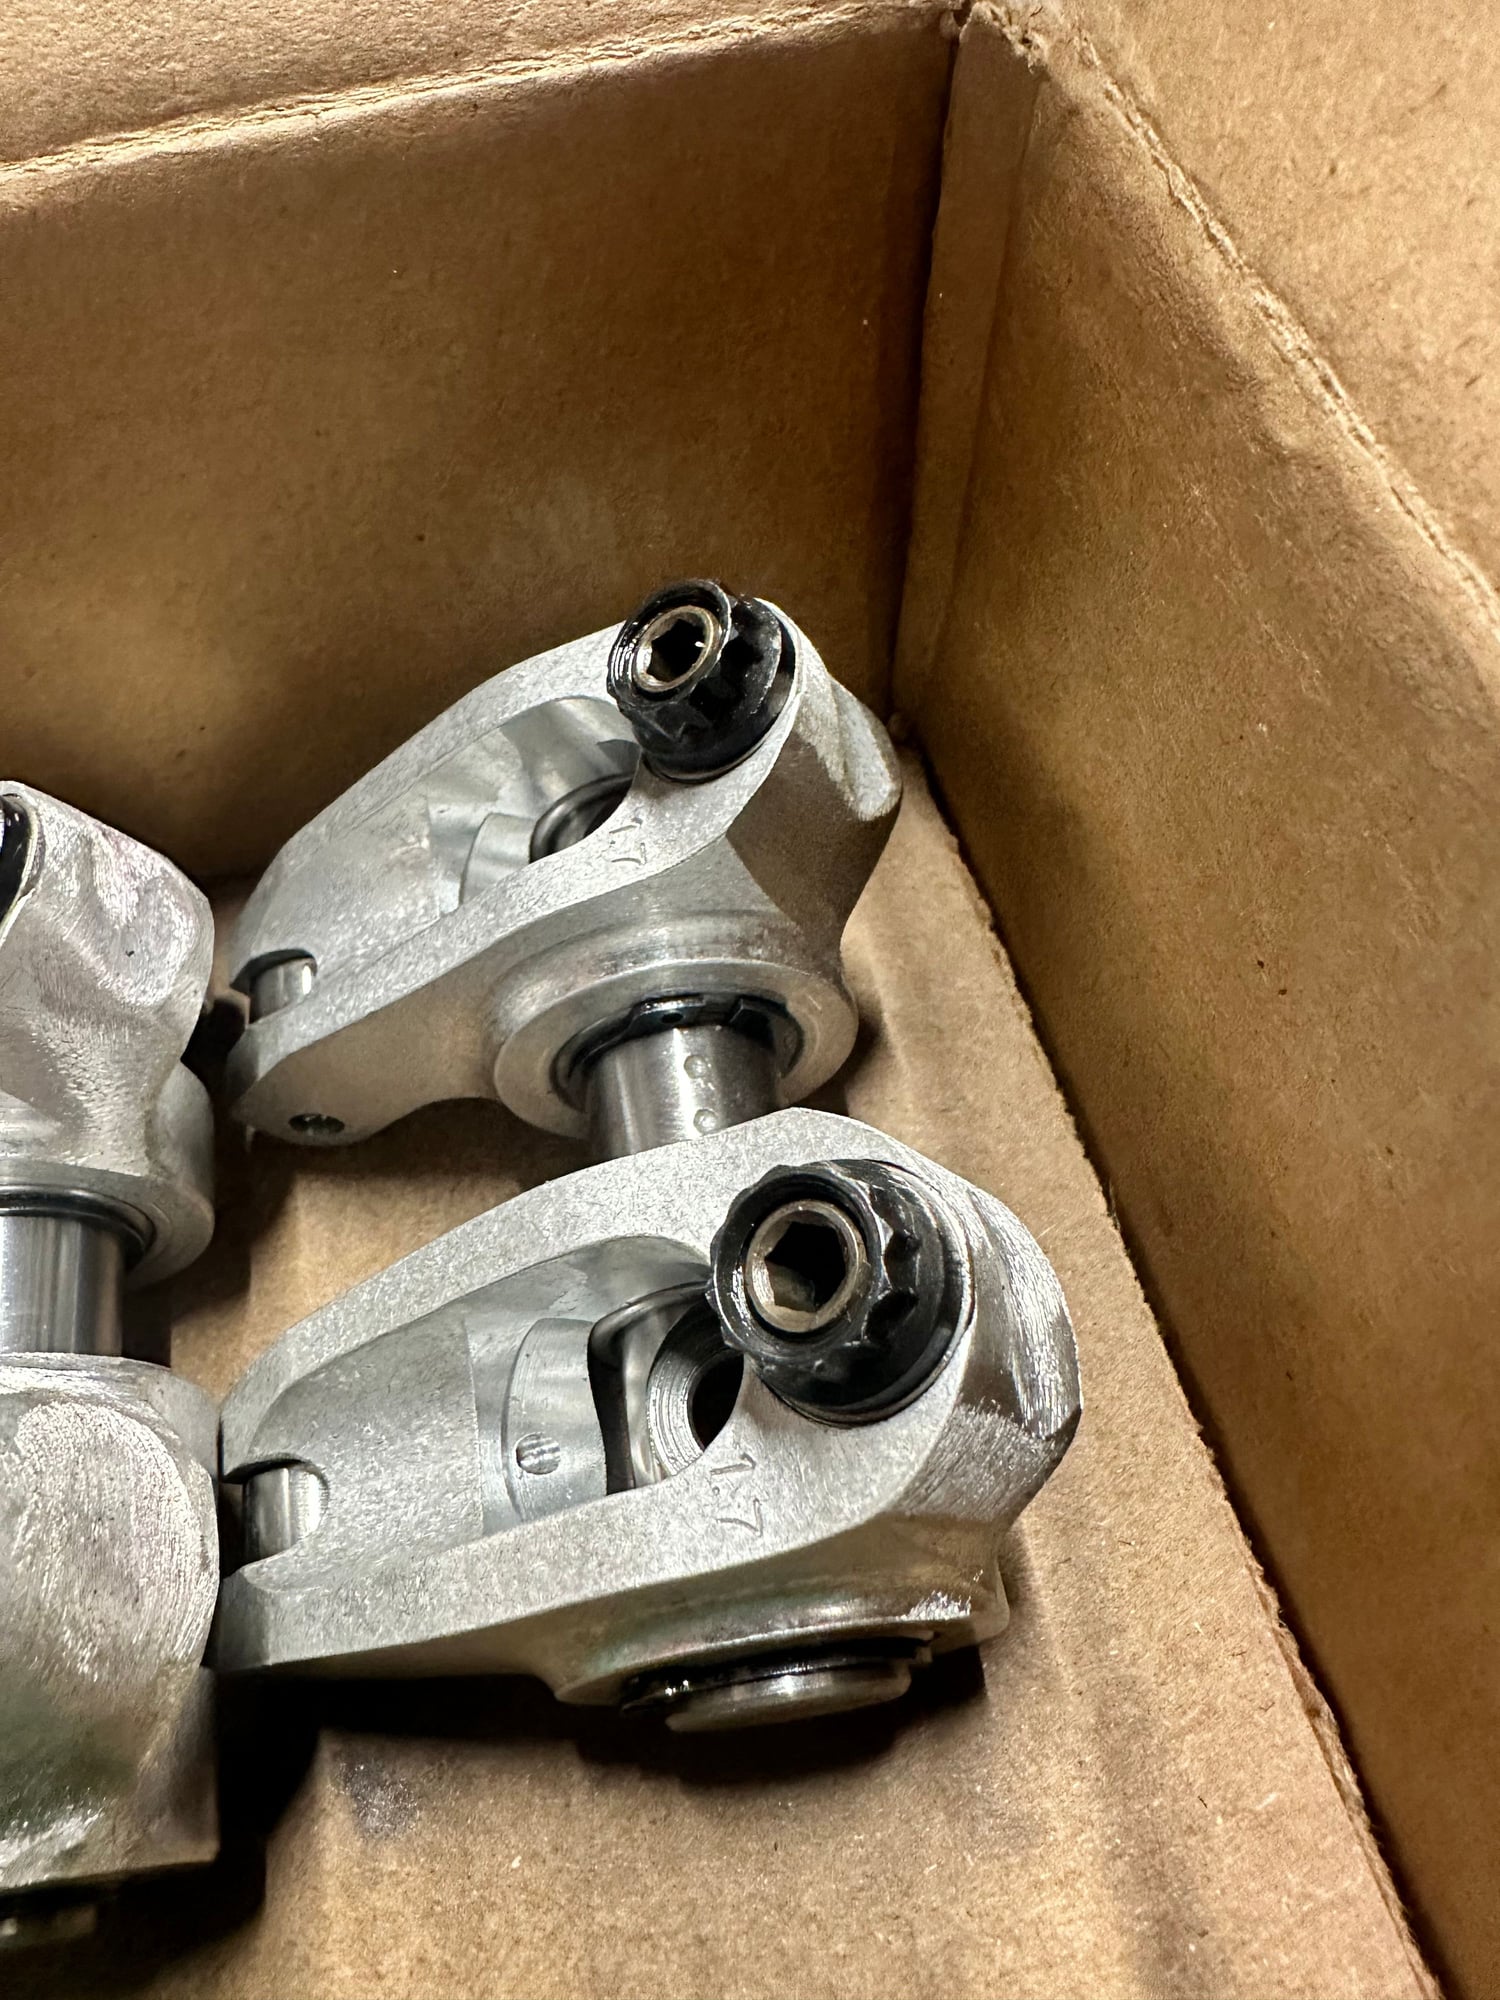 Engine - Internals - Yella Terra Roller Rocker Arms - Used - All Years  All Models - Granite Falls, NC 28630, United States